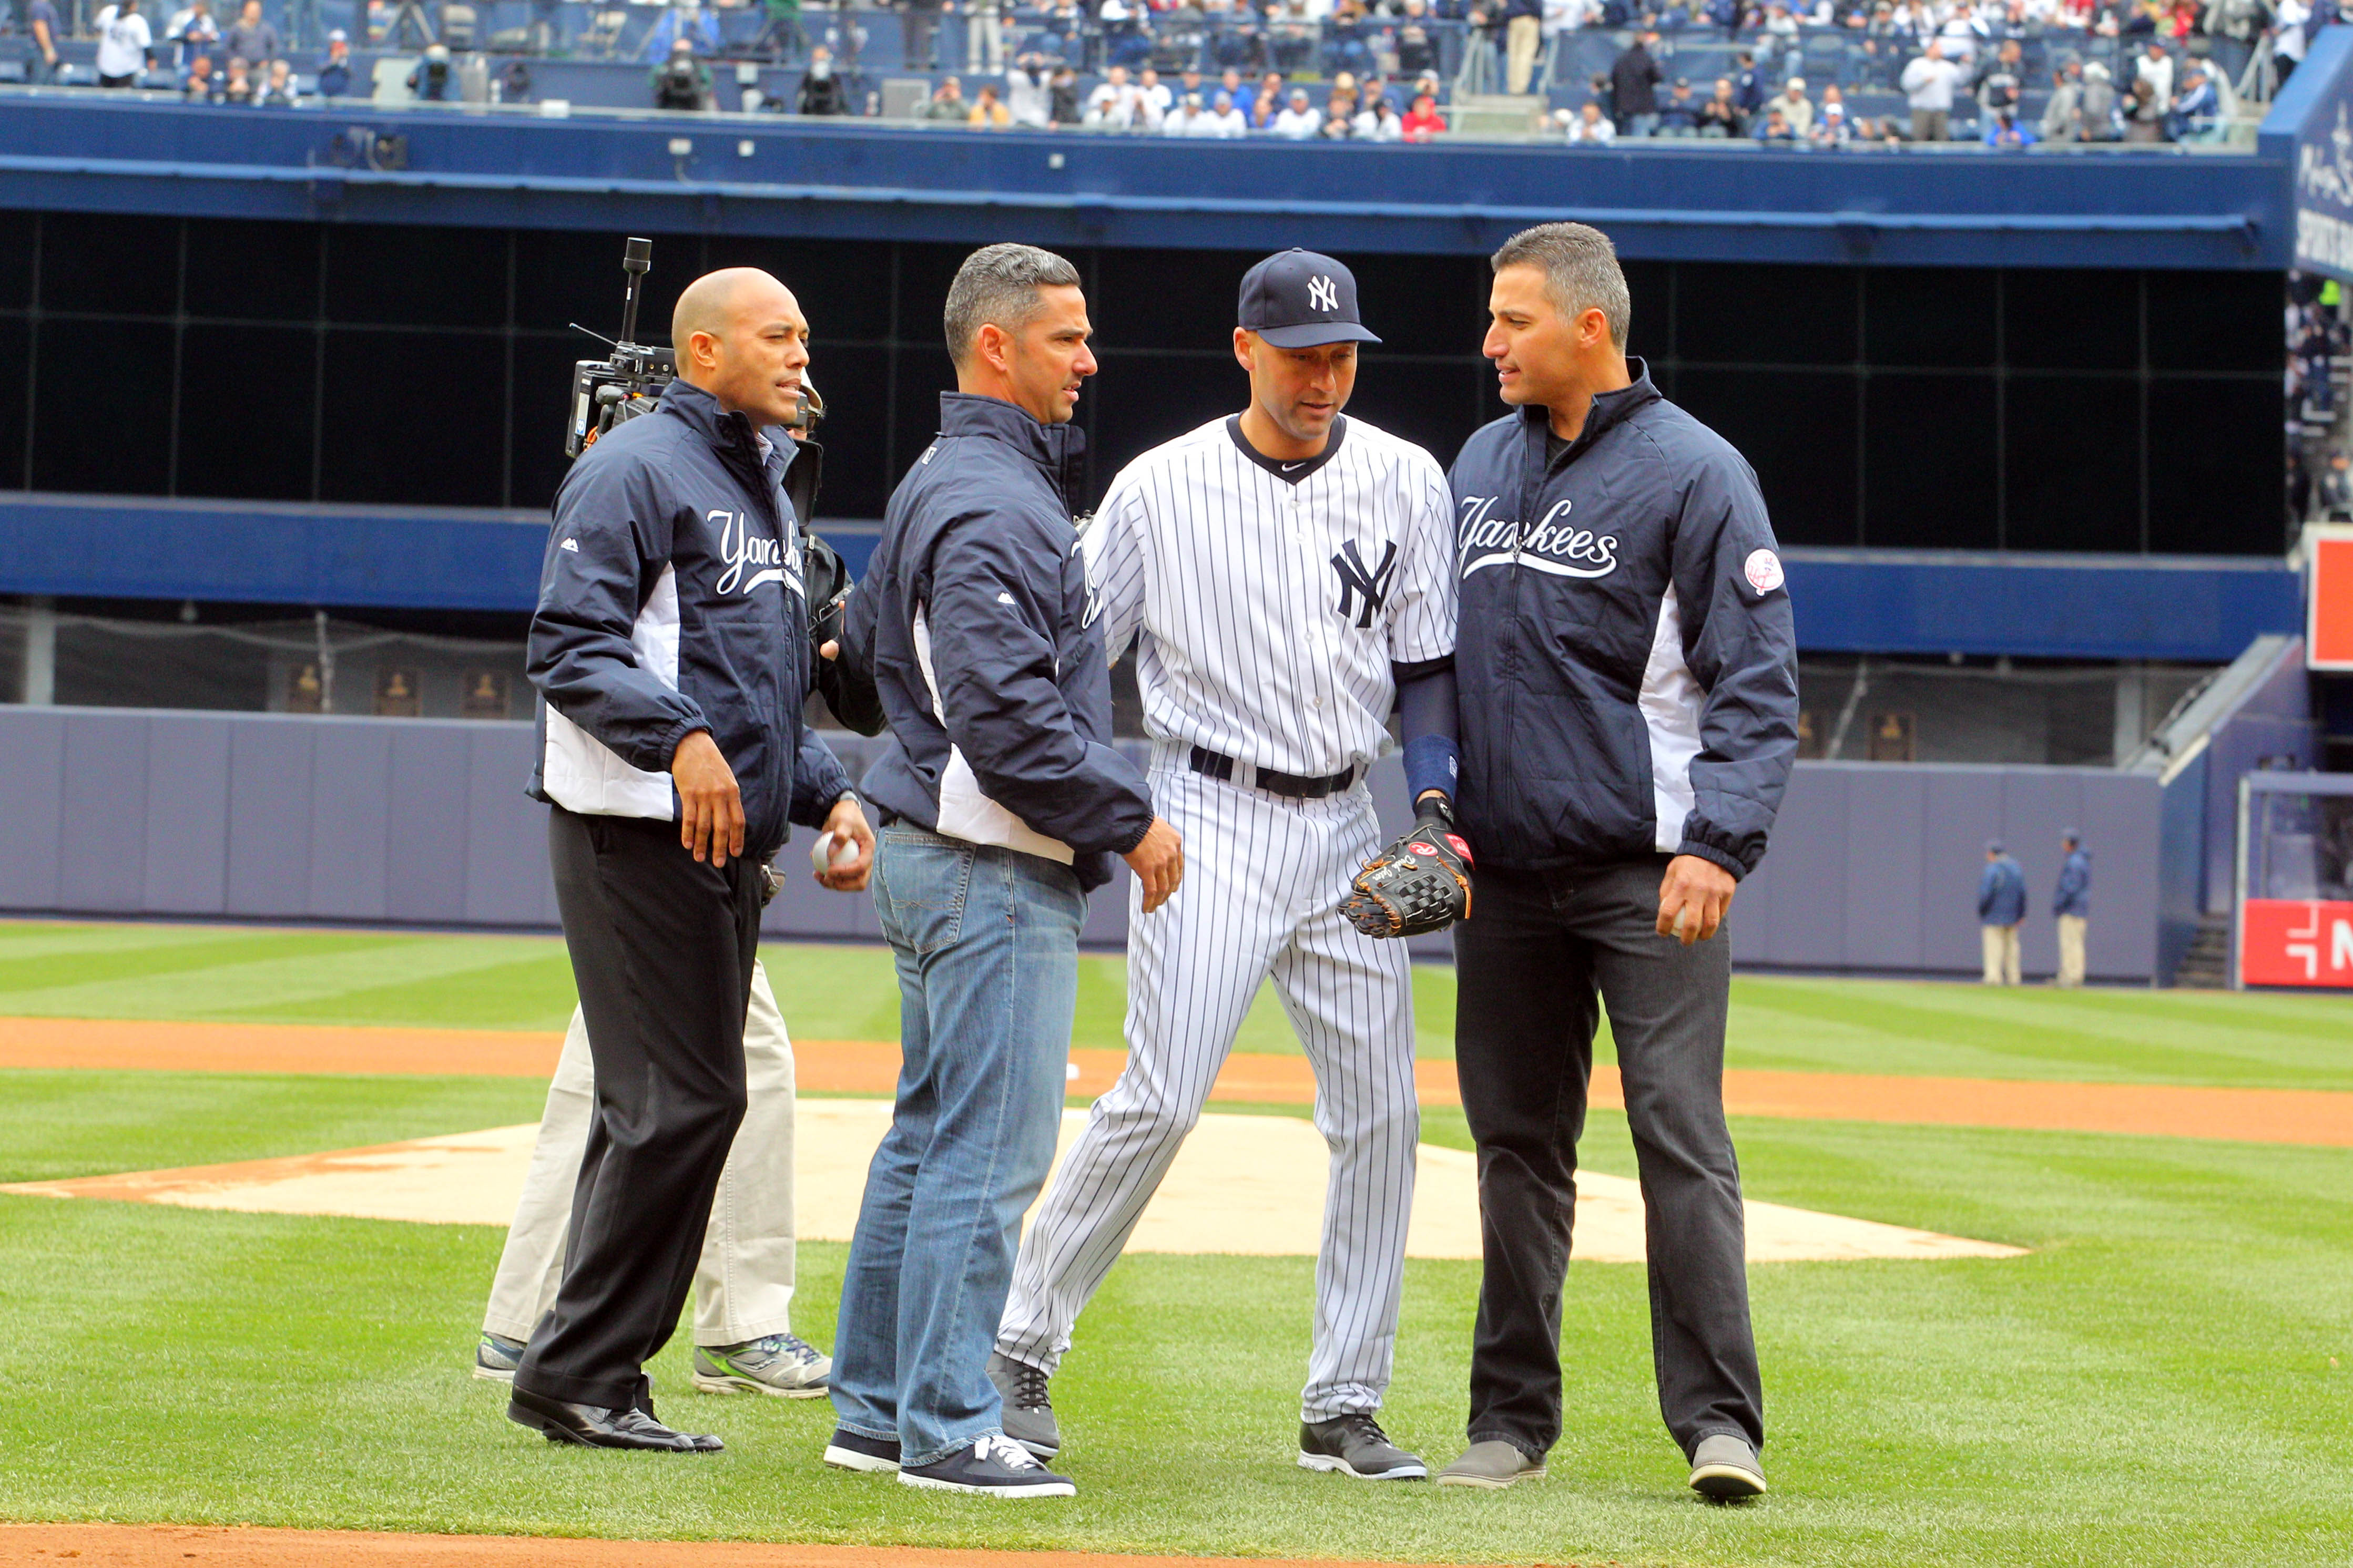 The Yankees will retire three more numbers in 2015